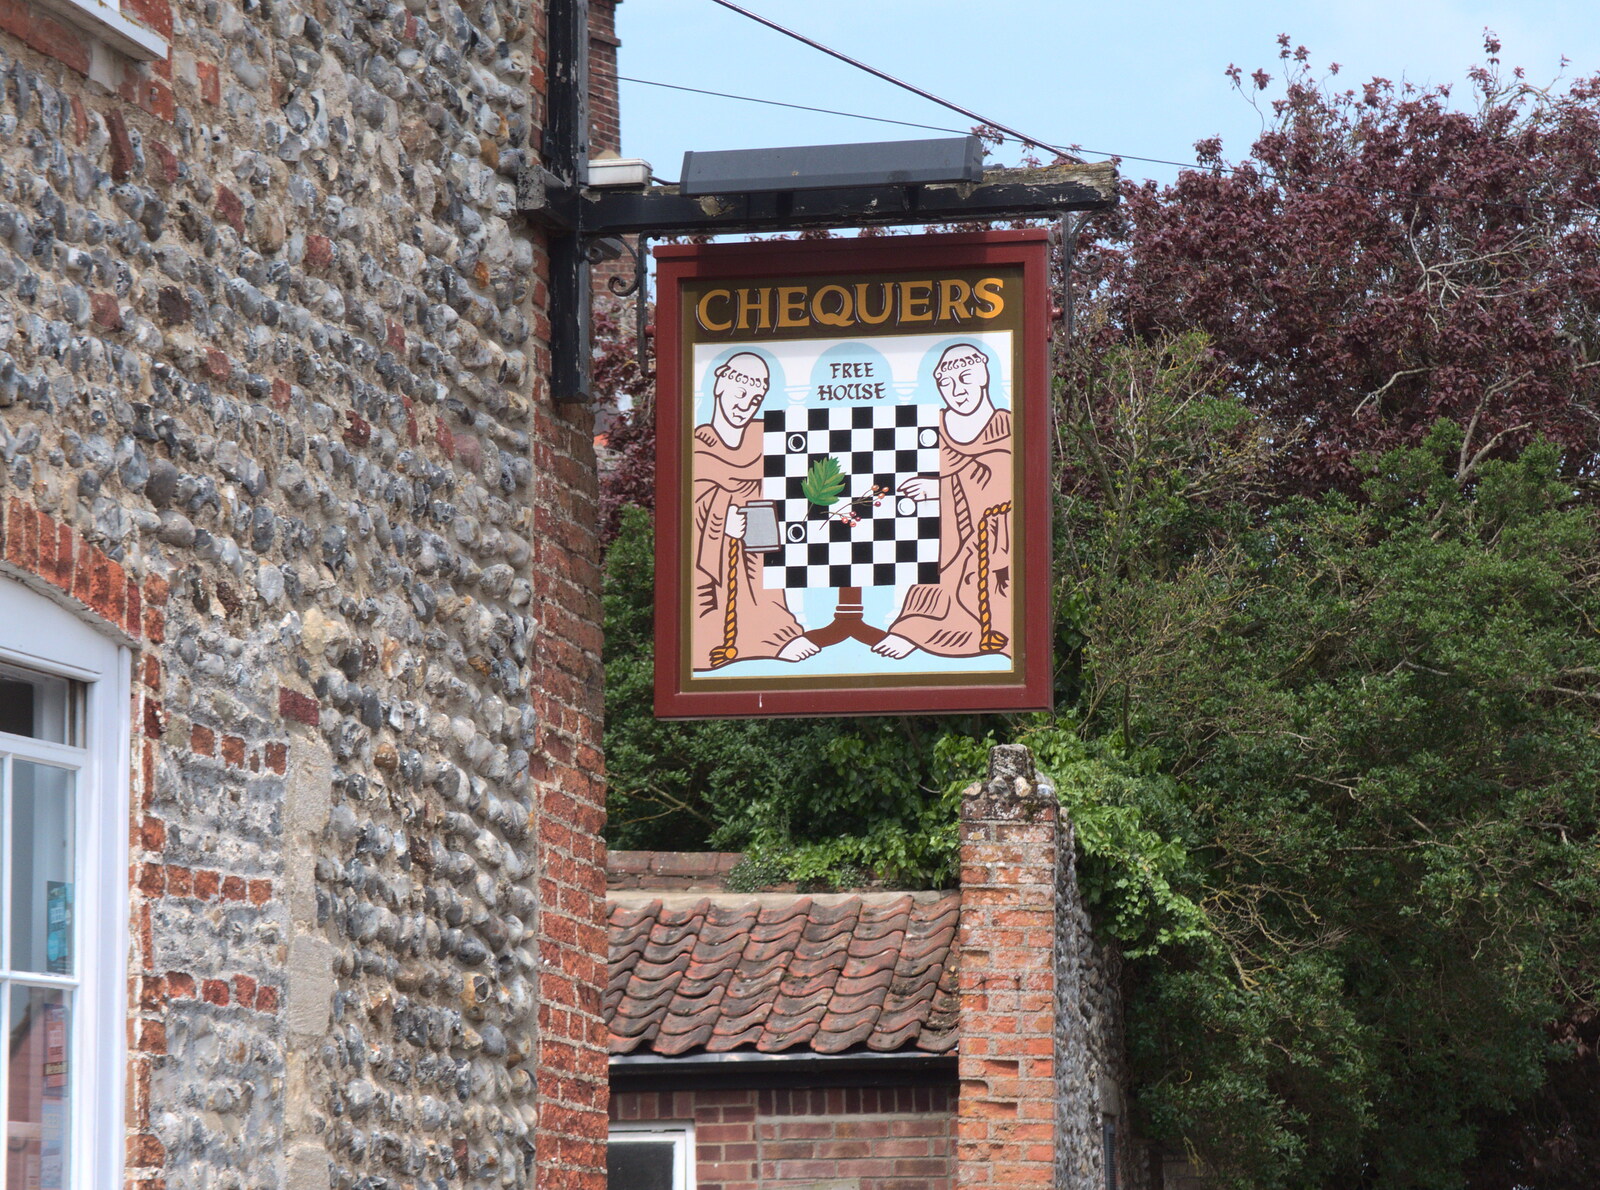 The Chequers' pub sign from The BSCC Weekend Away, Holt, Norfolk - 12th May 2018